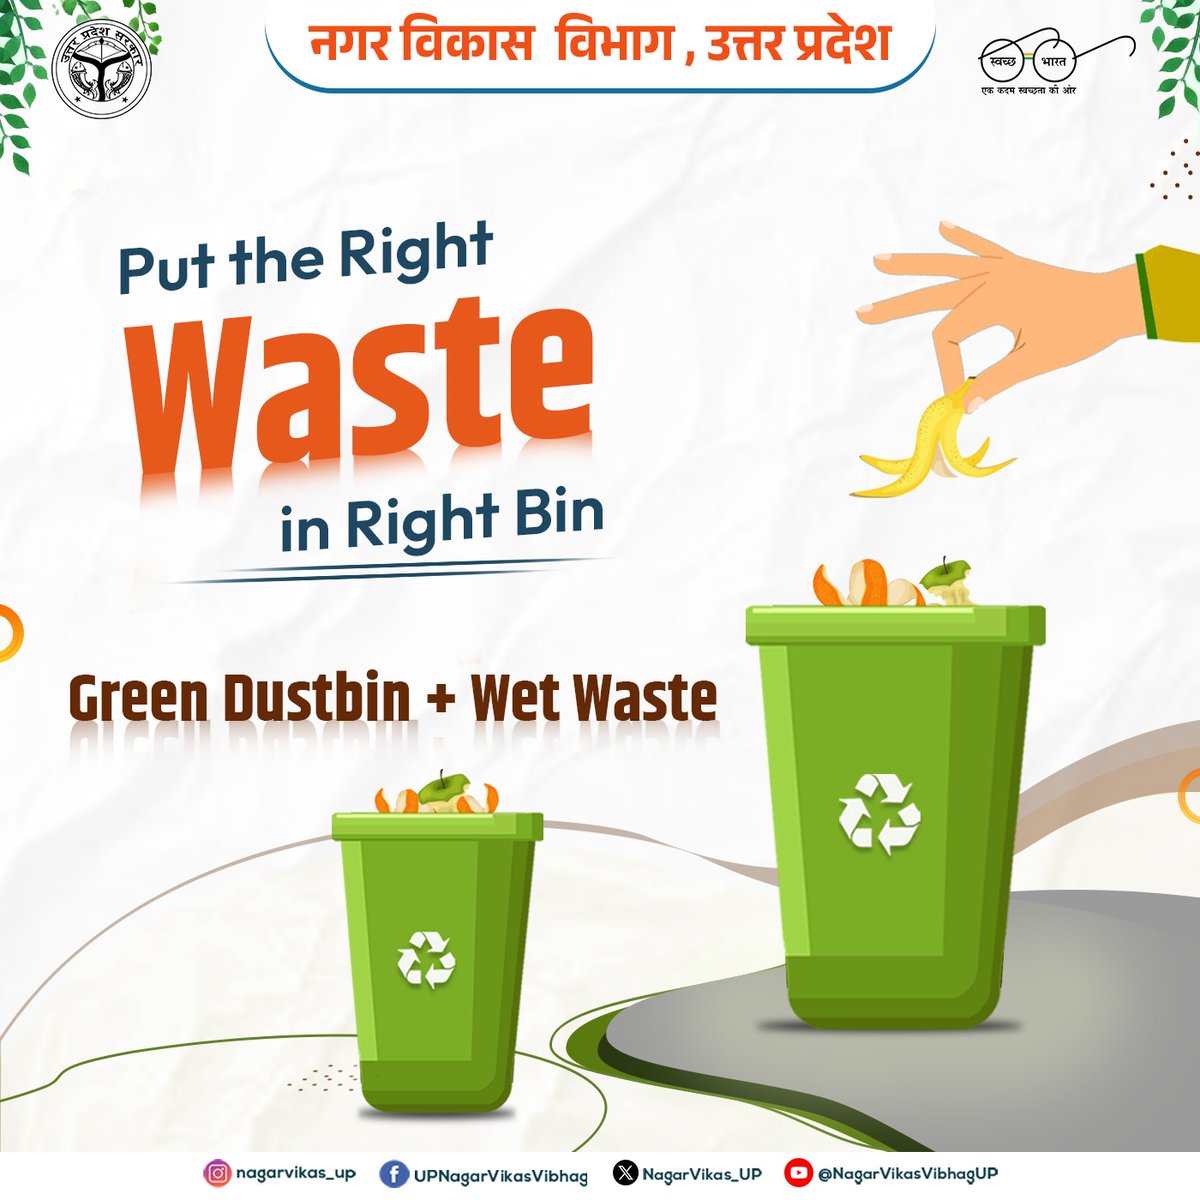 🌿 Put the Right Waste in the Right Bin! 🌿

Keep our environment clean and green by disposing of wet waste in green dustbins. Together, we can make a difference! 🍌🍅

#WasteNotGreenNot #BinItRight #SwachhBharat #greendustbin #wastemanagement #CleanIndia